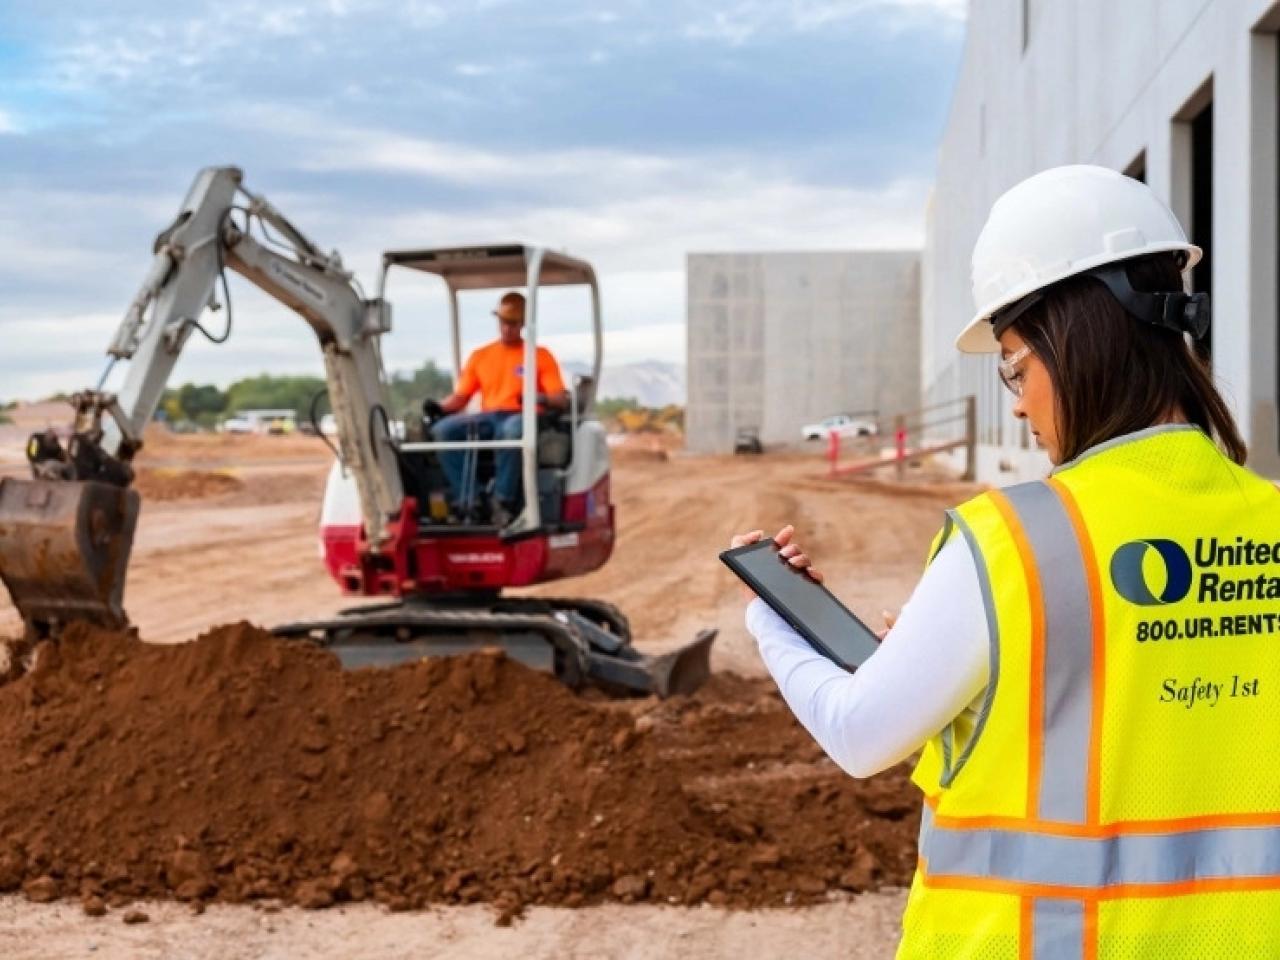 A person looking at a tablet. Another in the distance using a large digging machine.